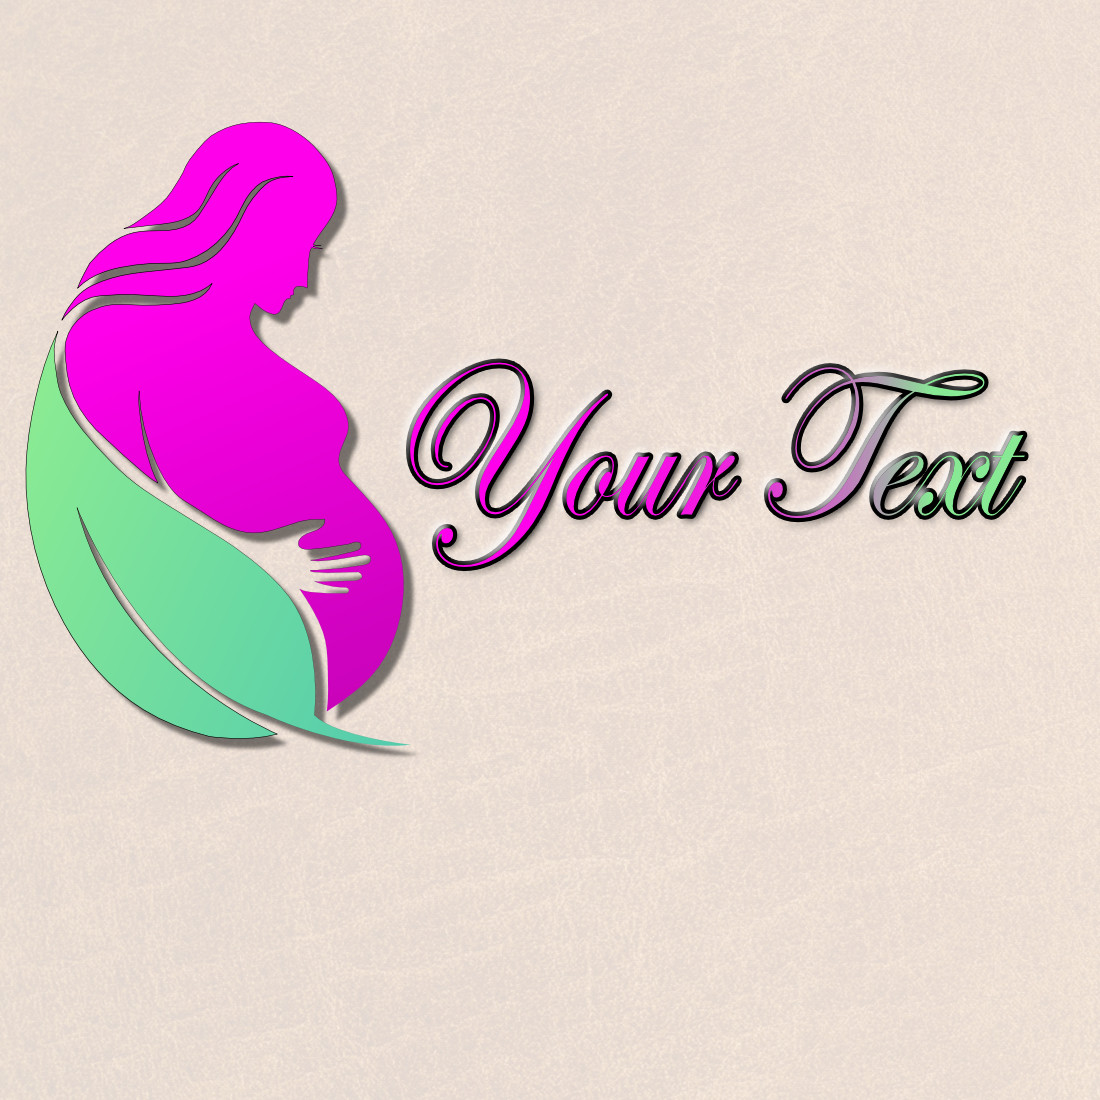 The logo depicts a stylized image of a pregnant woman preview image.